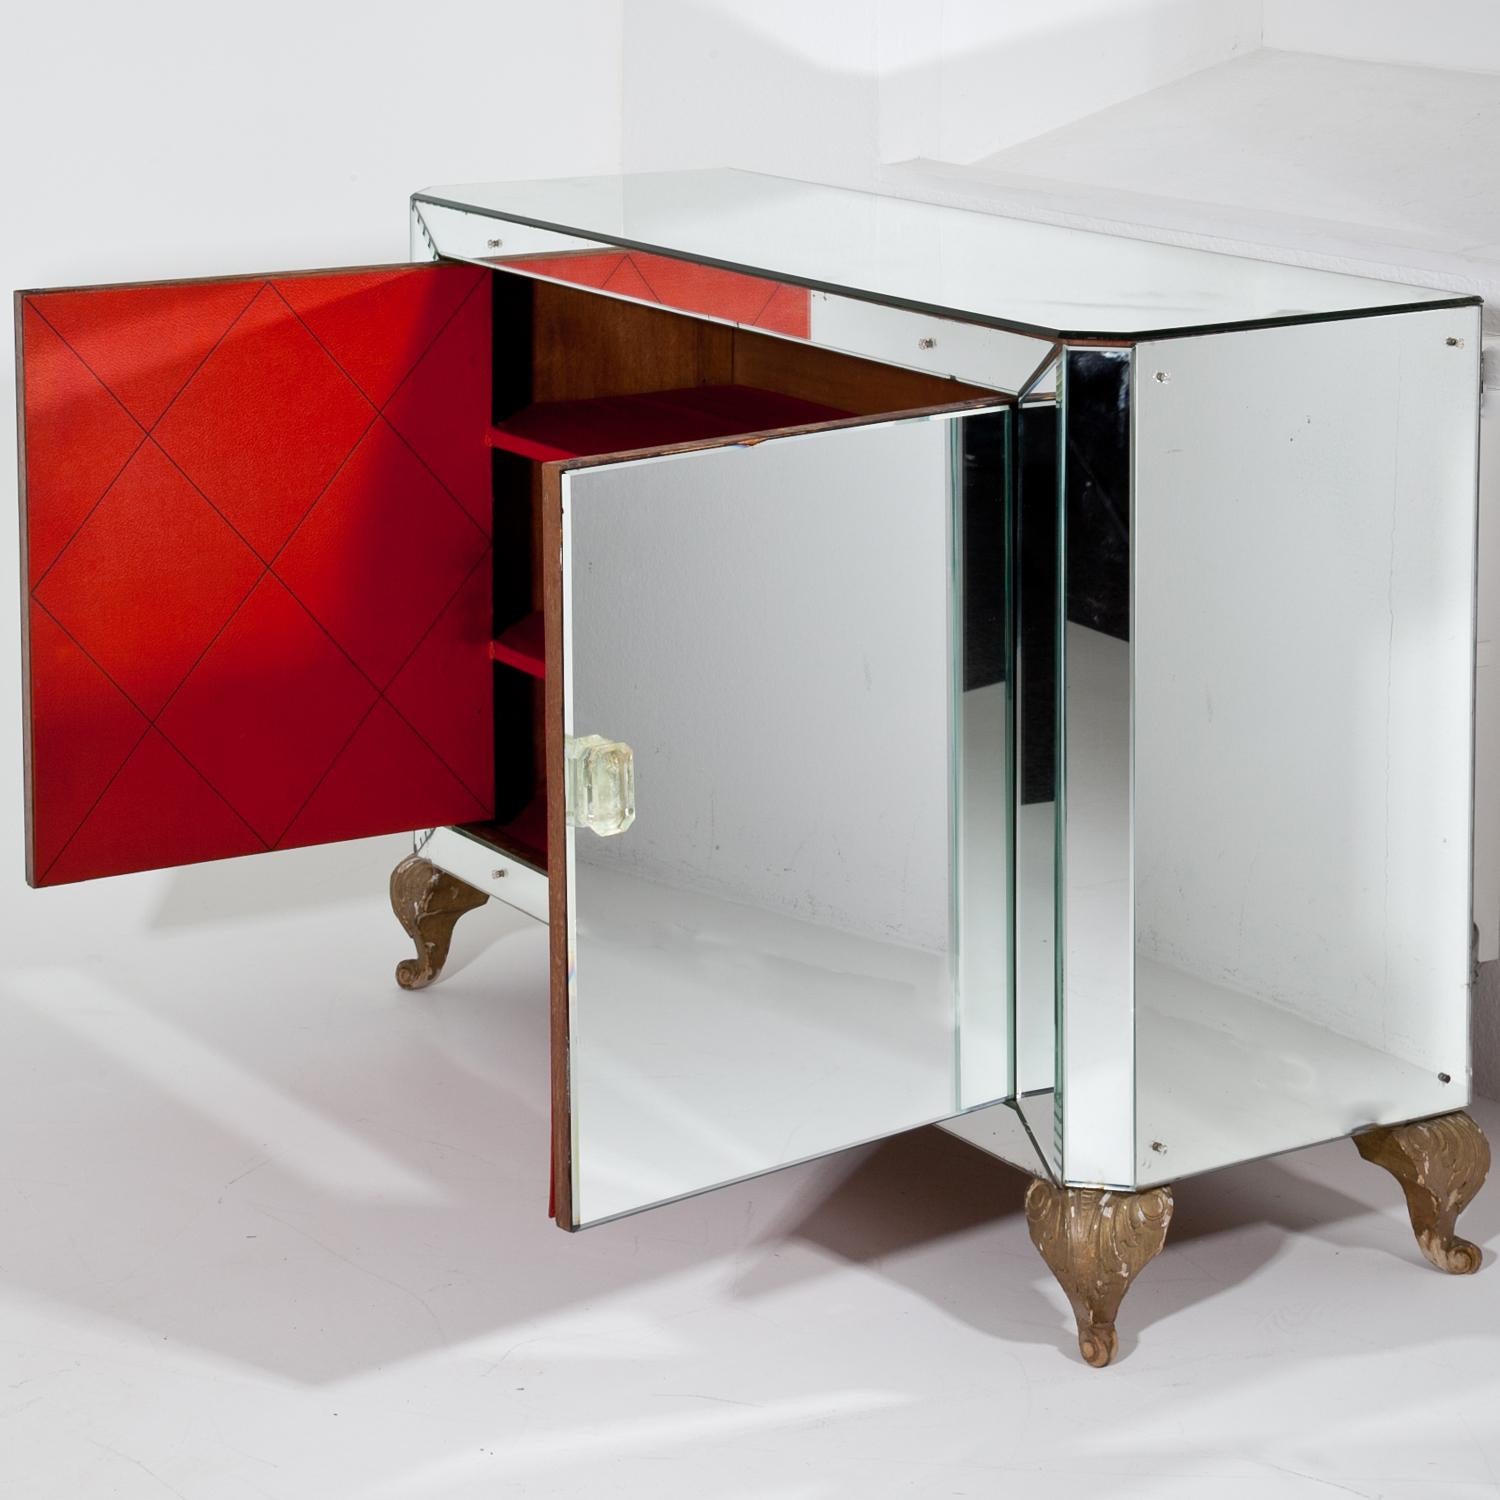 Two-doored bar cabinet, standing on carved volute legs and a completely mirrored body with slanted corners and flower-shaped screw heads. The handles are glass and the insides of the cabinet doors are covered with a red fabric with a rhomboid